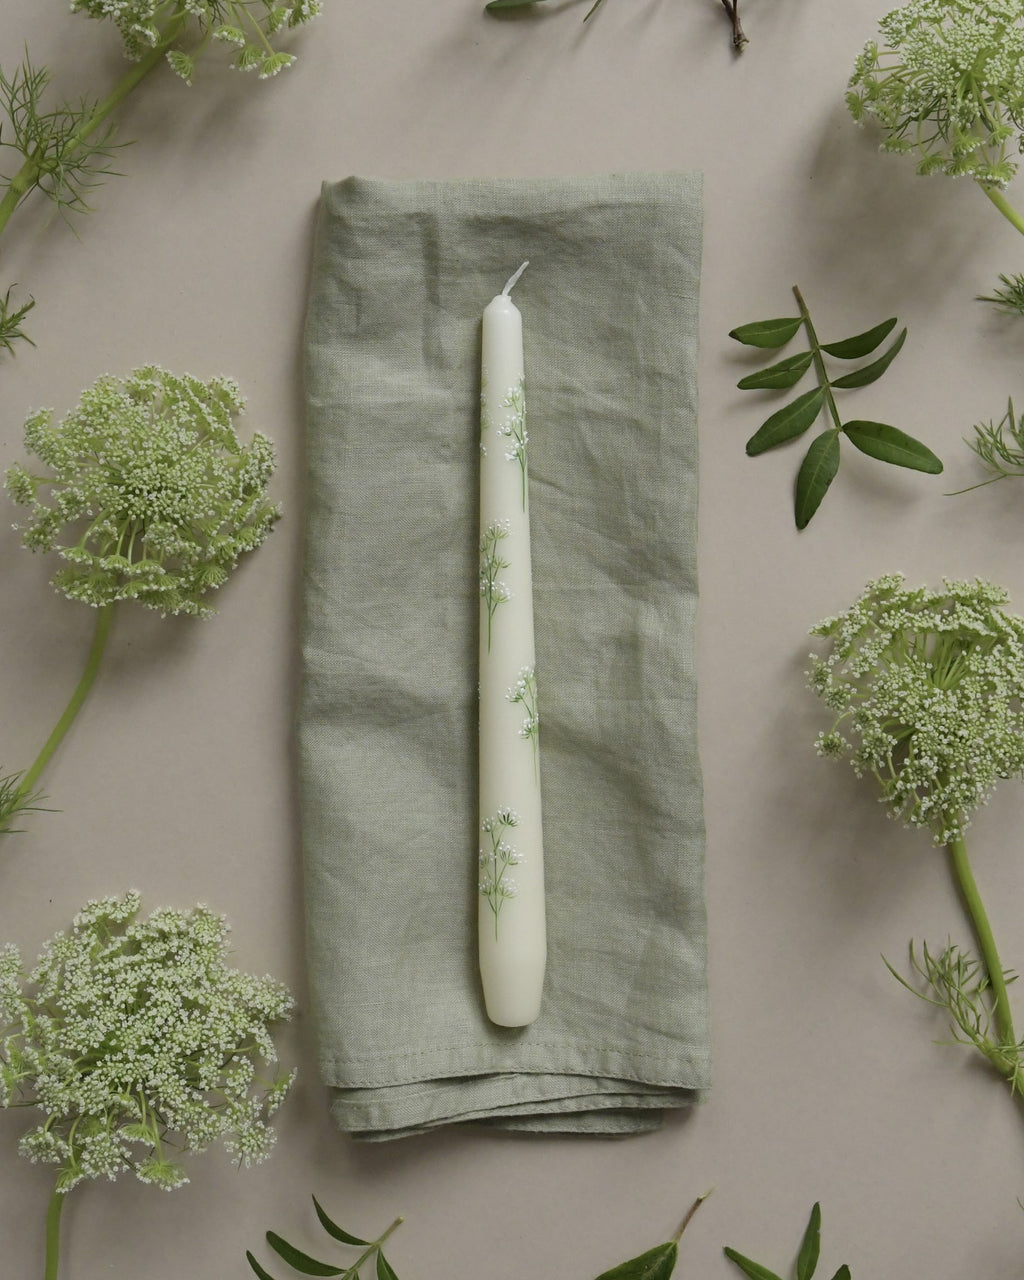 ivory dinner candle is painted with delicate cow parsley design.